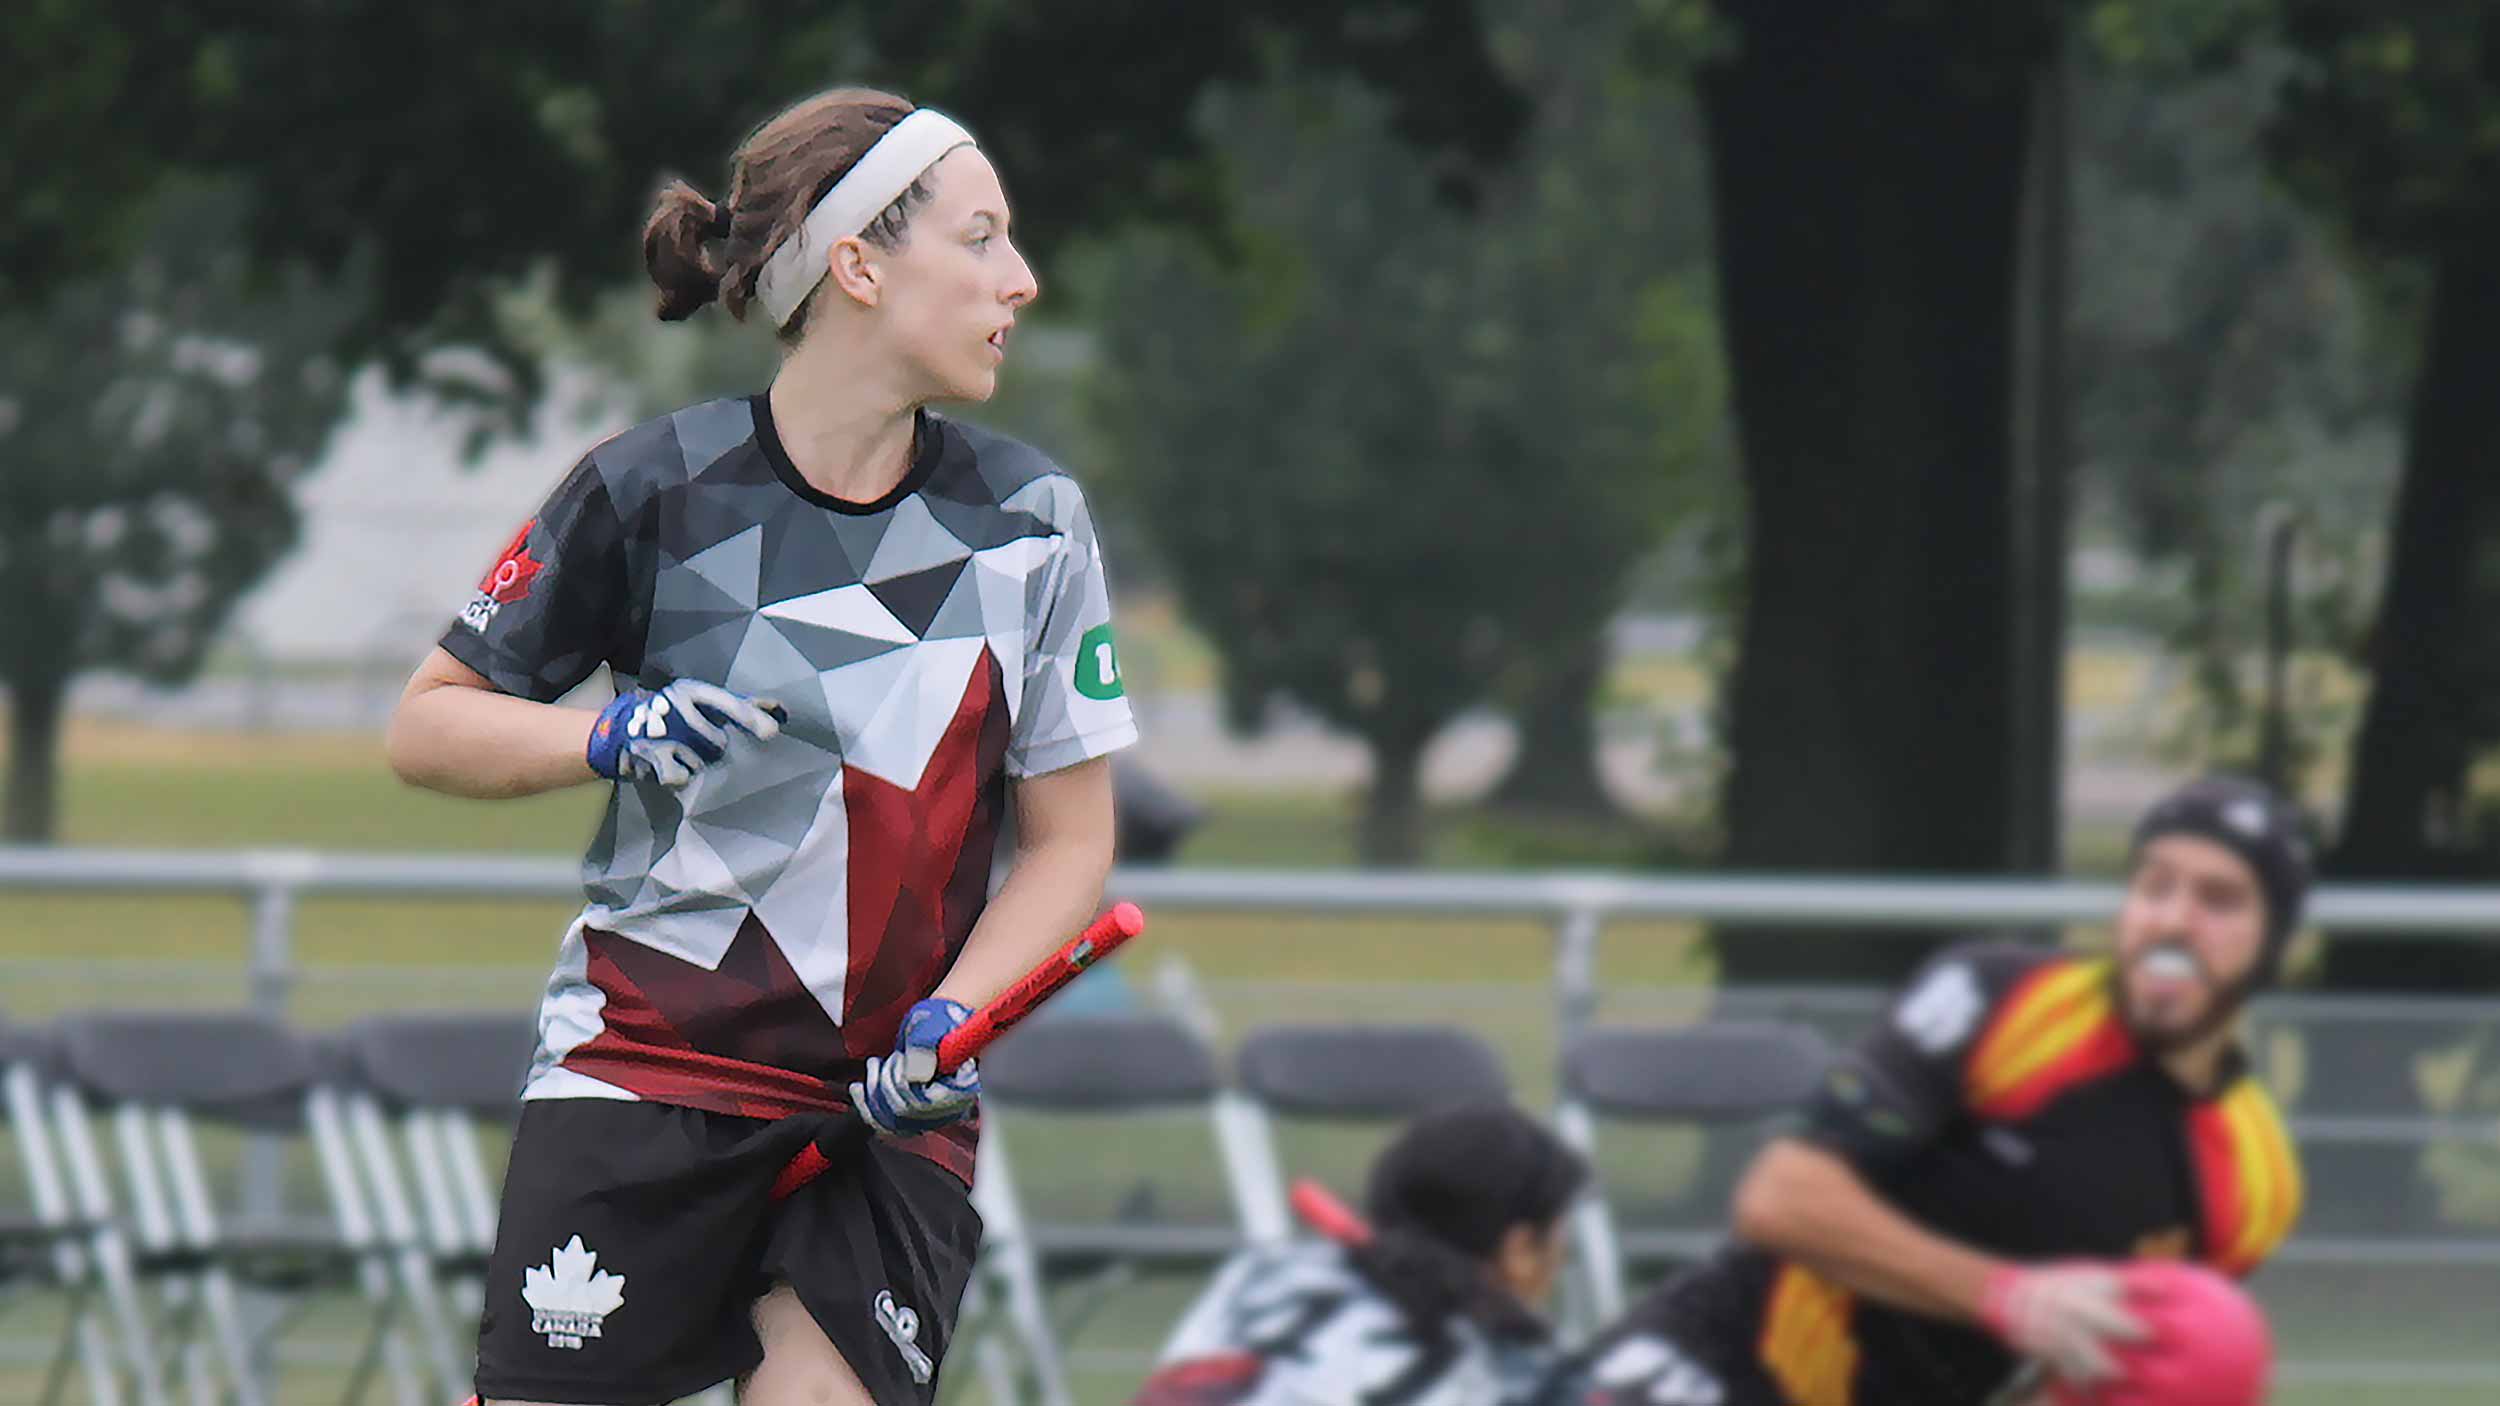 Photo of Quidditch Canada player in 2016 jersey.